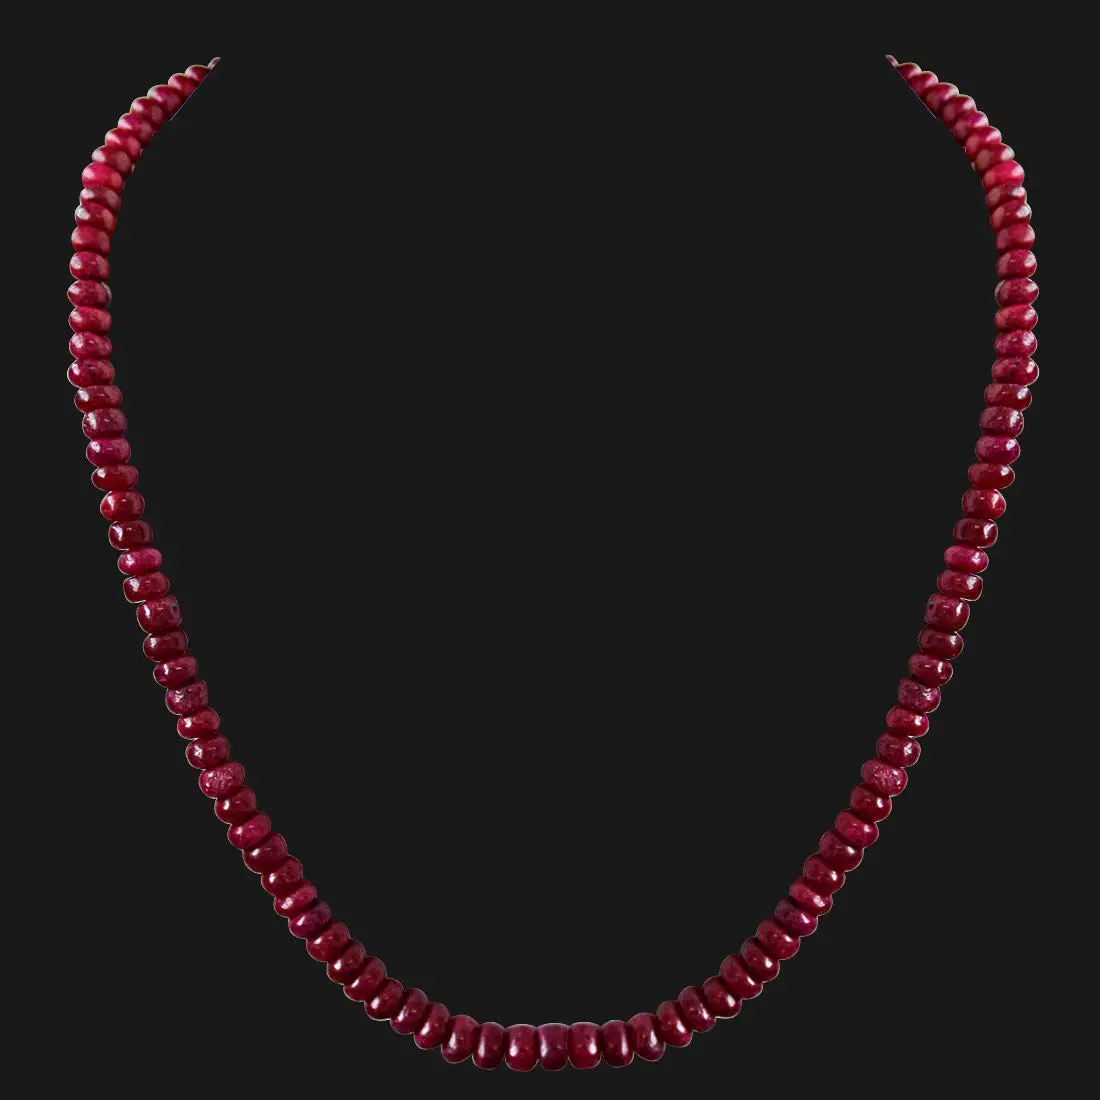 129cts Single Line Real Dark Maroon Ruby Beads Necklace for Women (129ctsRubyNeck)